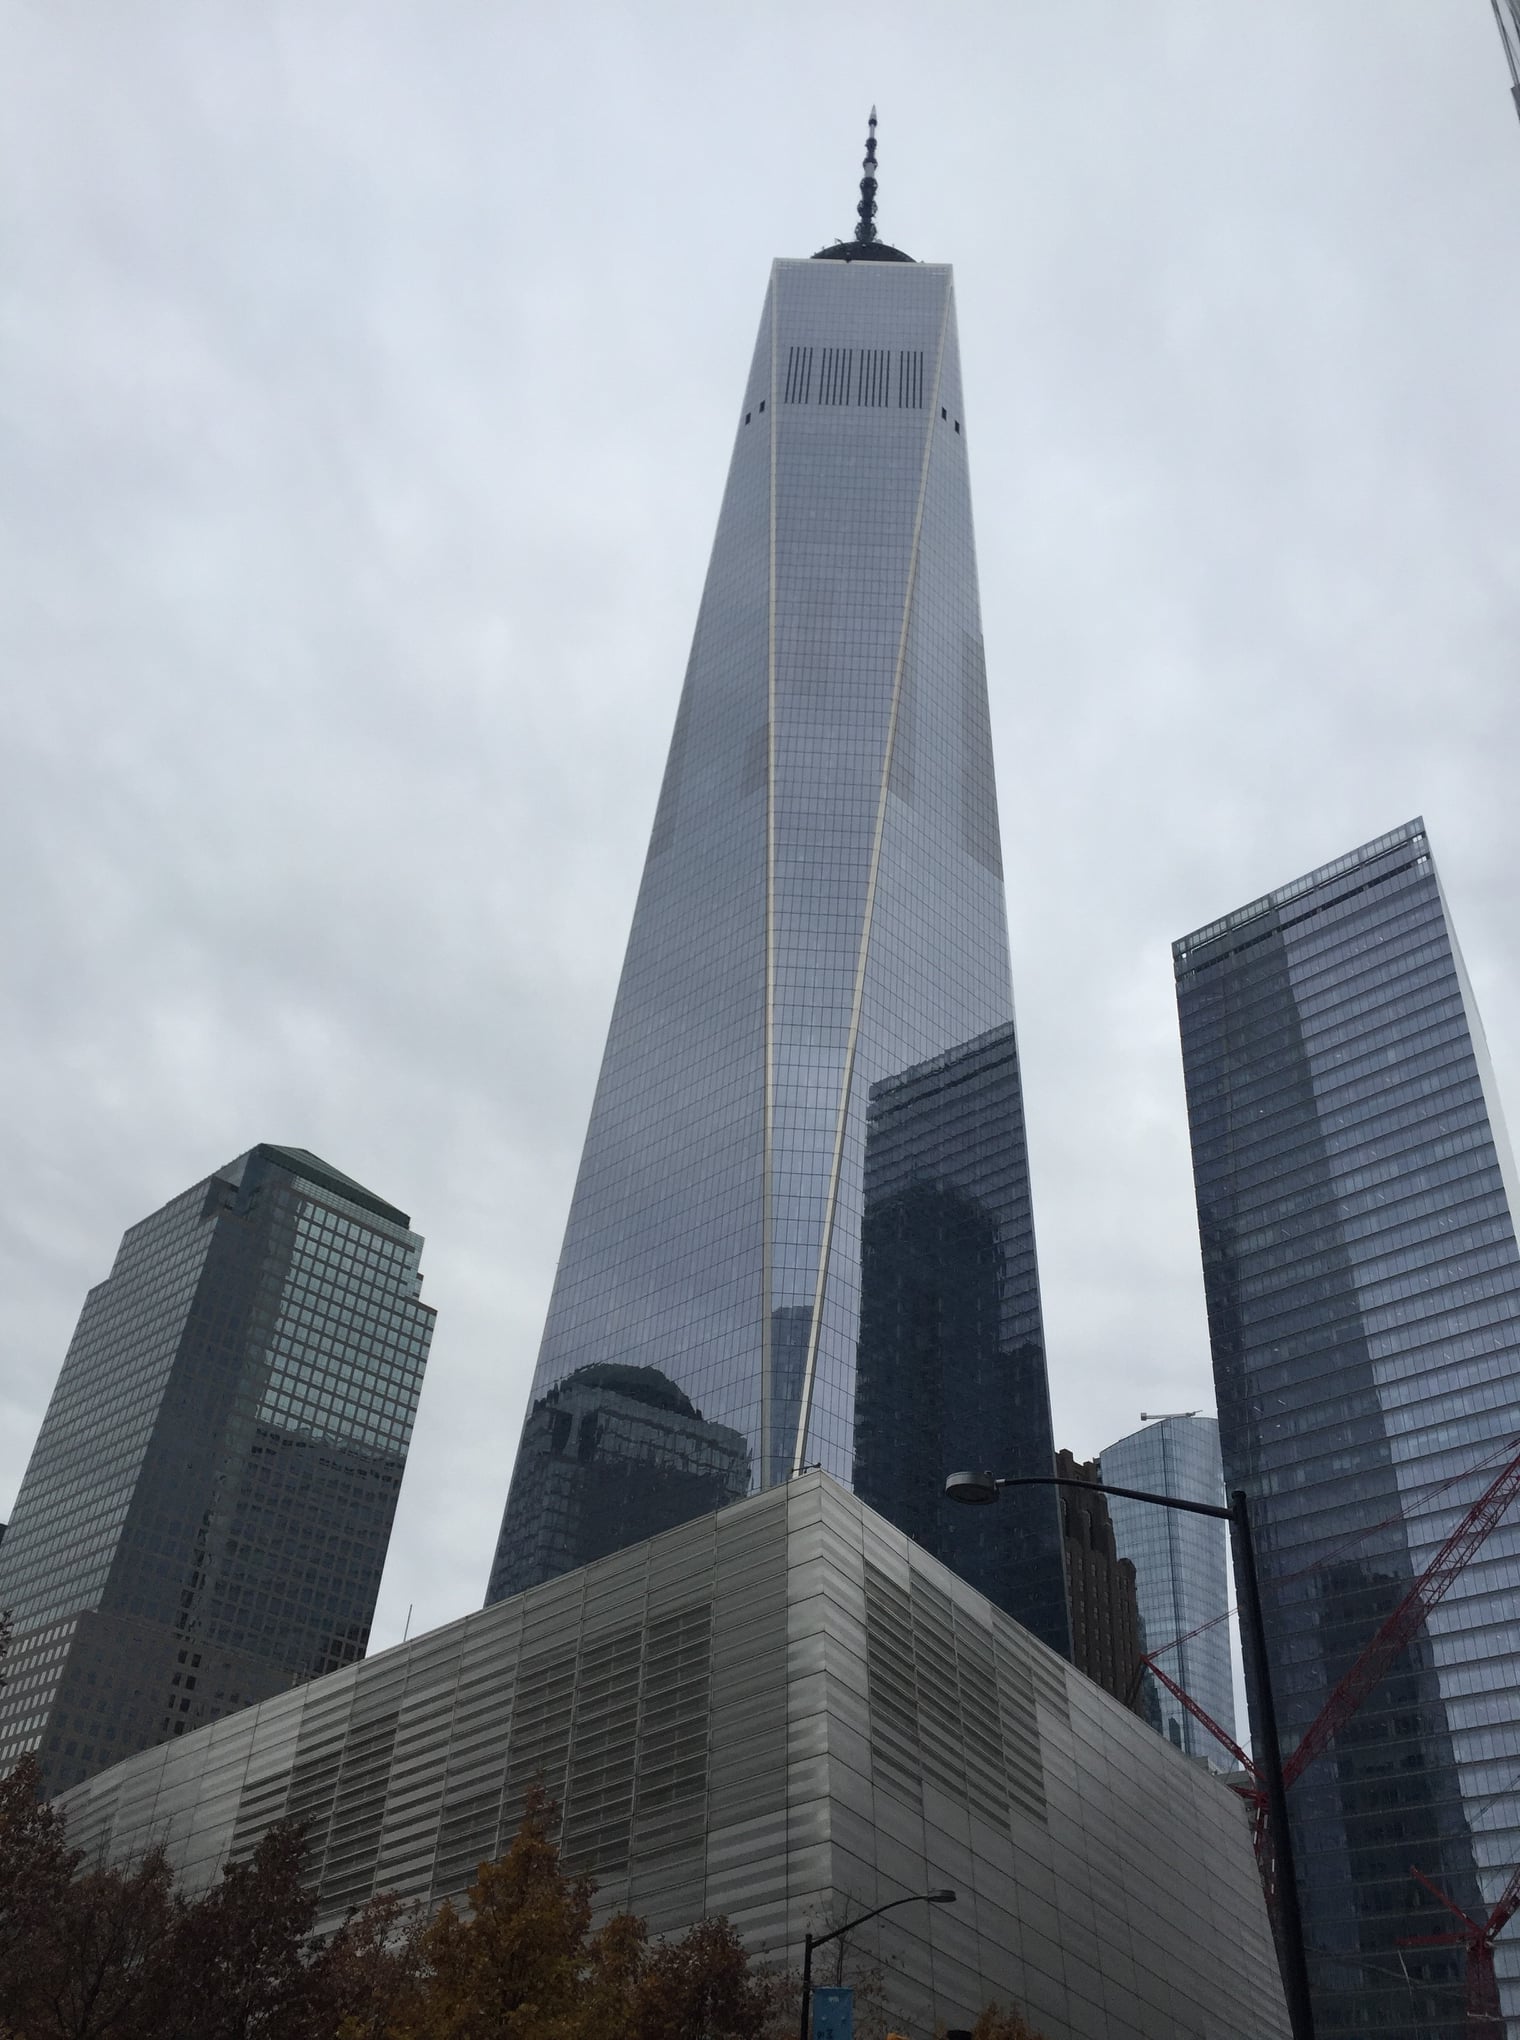 The current World Trade Center